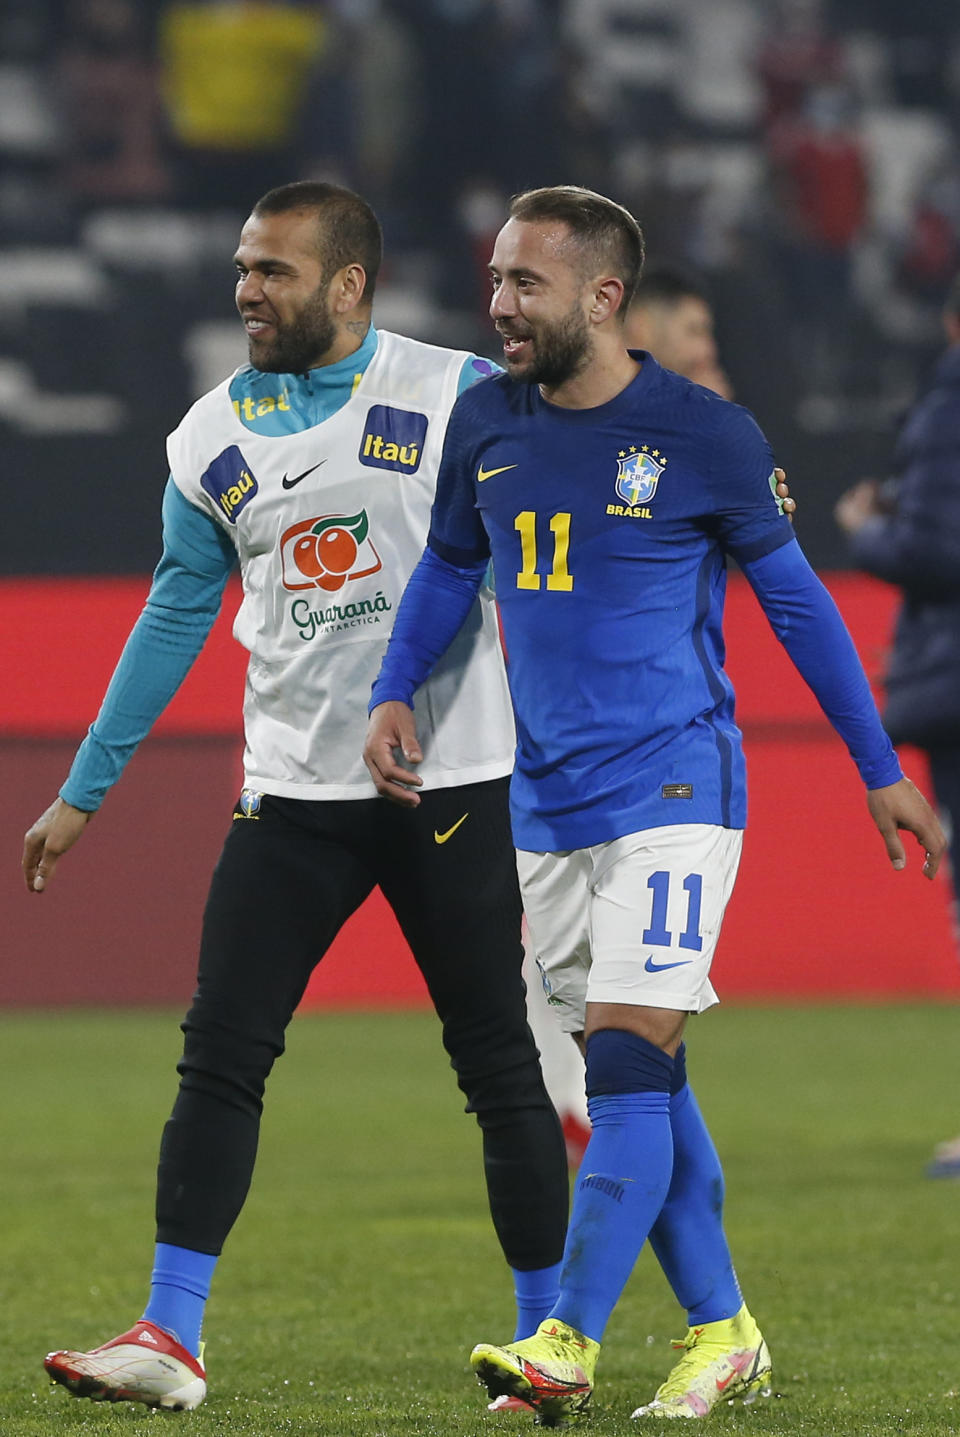 Brazil's Everton Ribeiro, right, and teammate Dani Alves celebrate their team's 1-0 victory over Chile during a qualifying soccer match for the FIFA World Cup Qatar 2022 at Monumental Stadium in Santiago, Chile, Thursday, Sept. 2, 2021. (Claudio Reyes/Pool via AP)